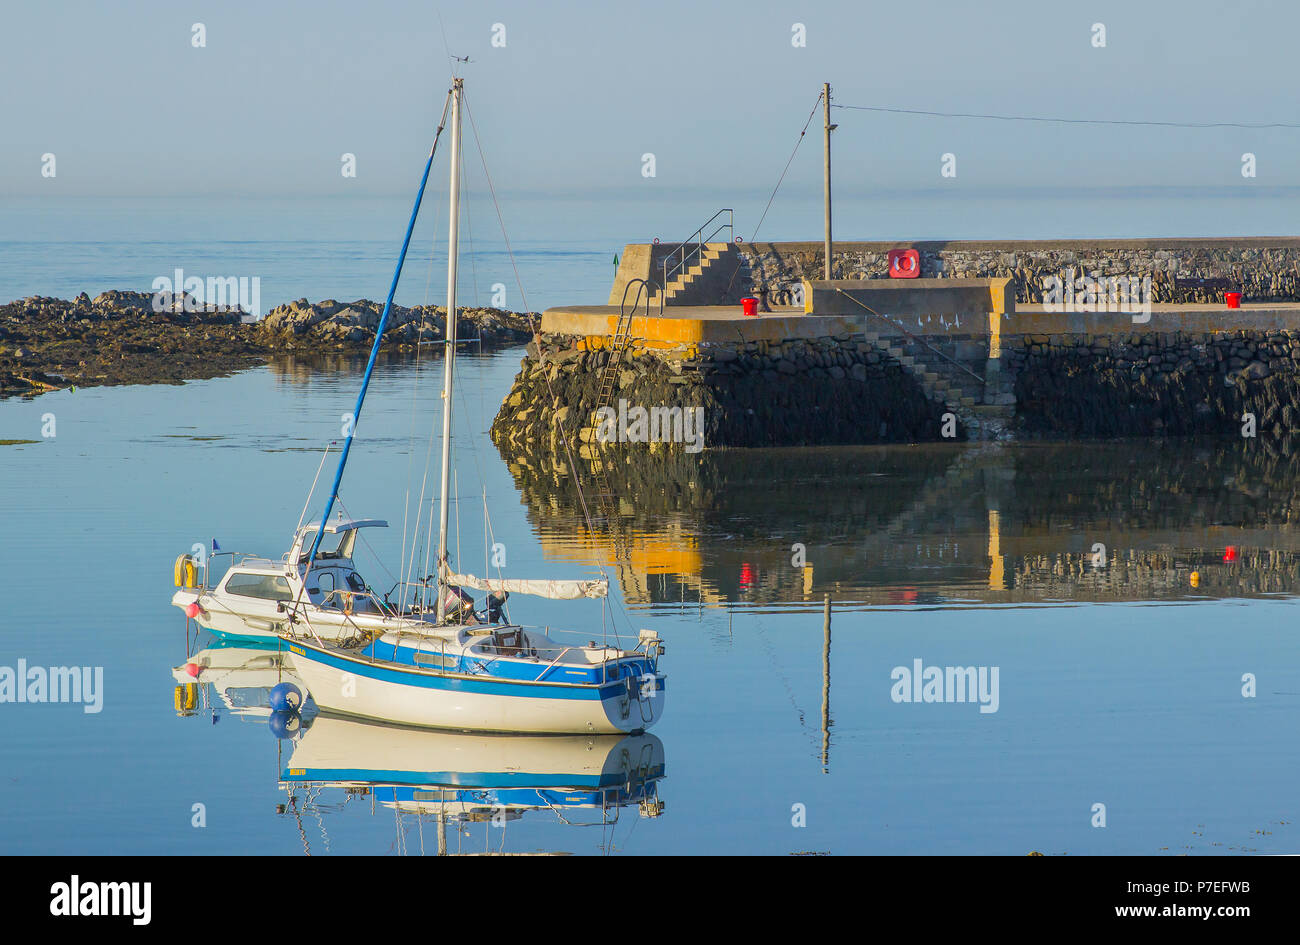 29 June 2018 Small pleasure boats and yachts on their moorings on a beautiful summer evening in Groomsport Village Harbour Co Down Northern Ireland Stock Photo